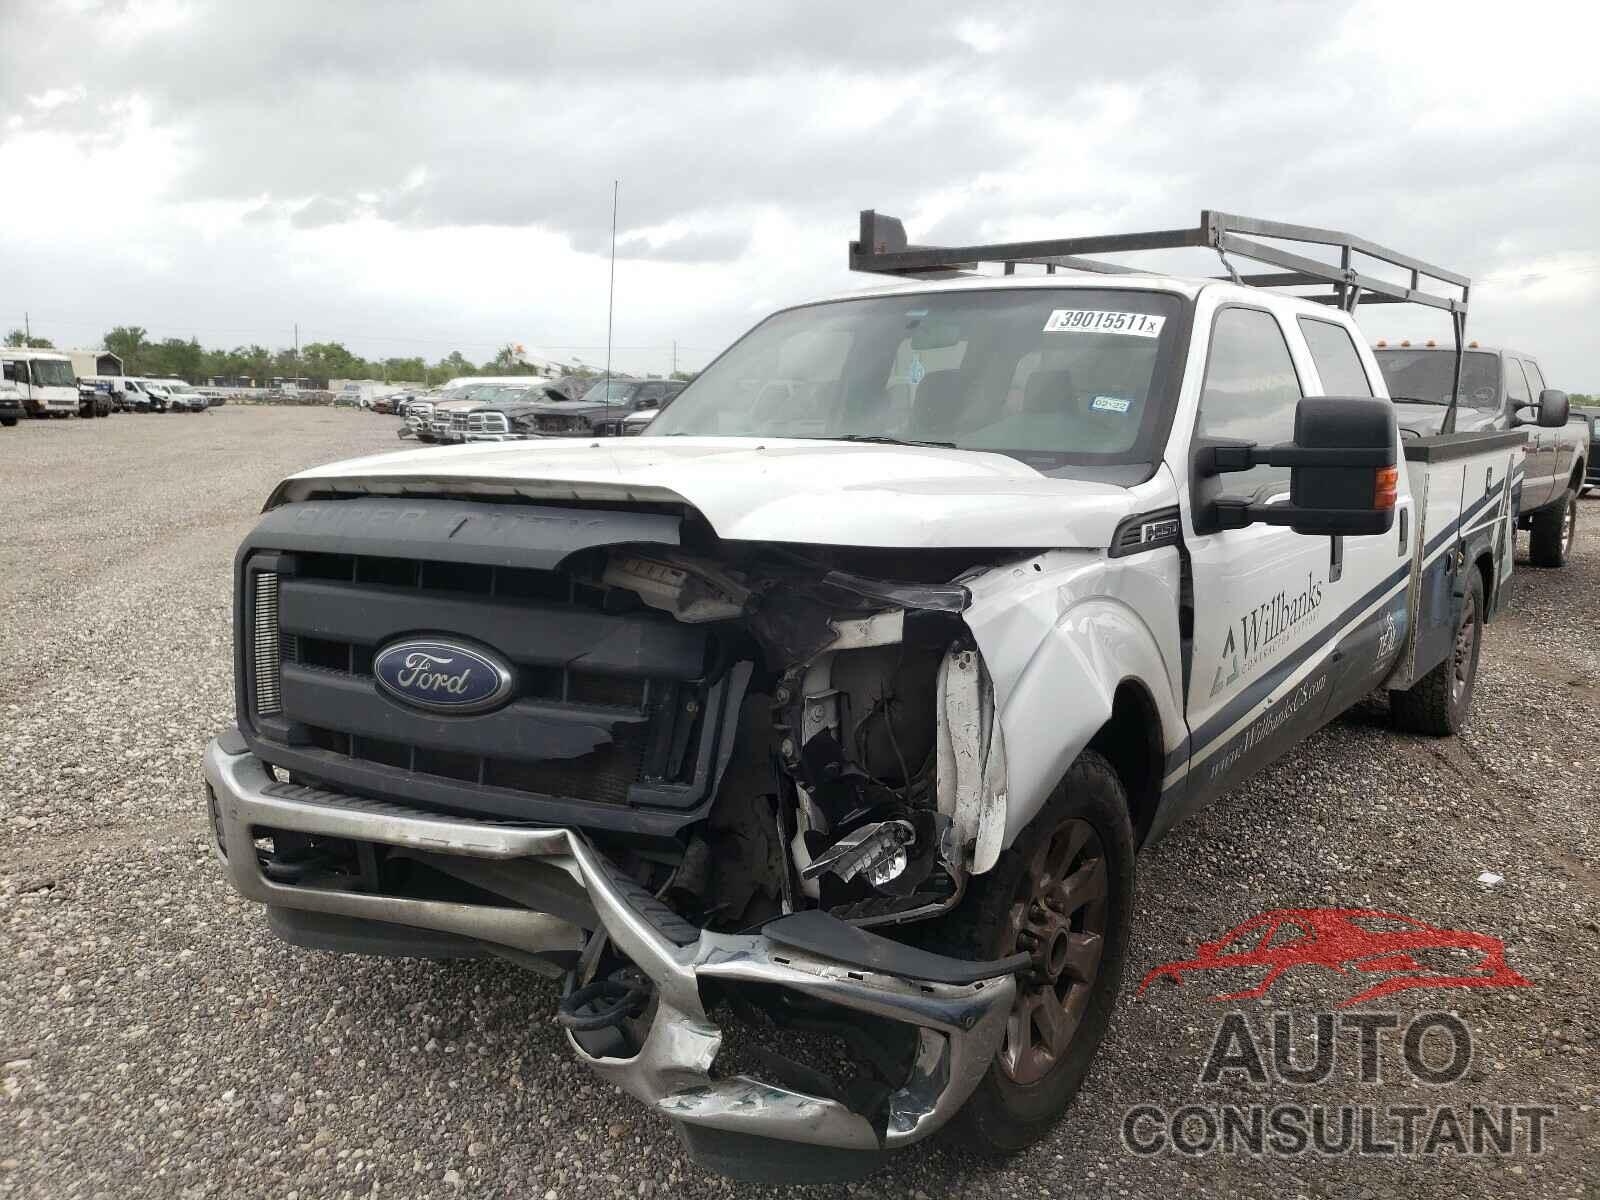 FORD F250 2016 - 1FT7W2A63GEB30590